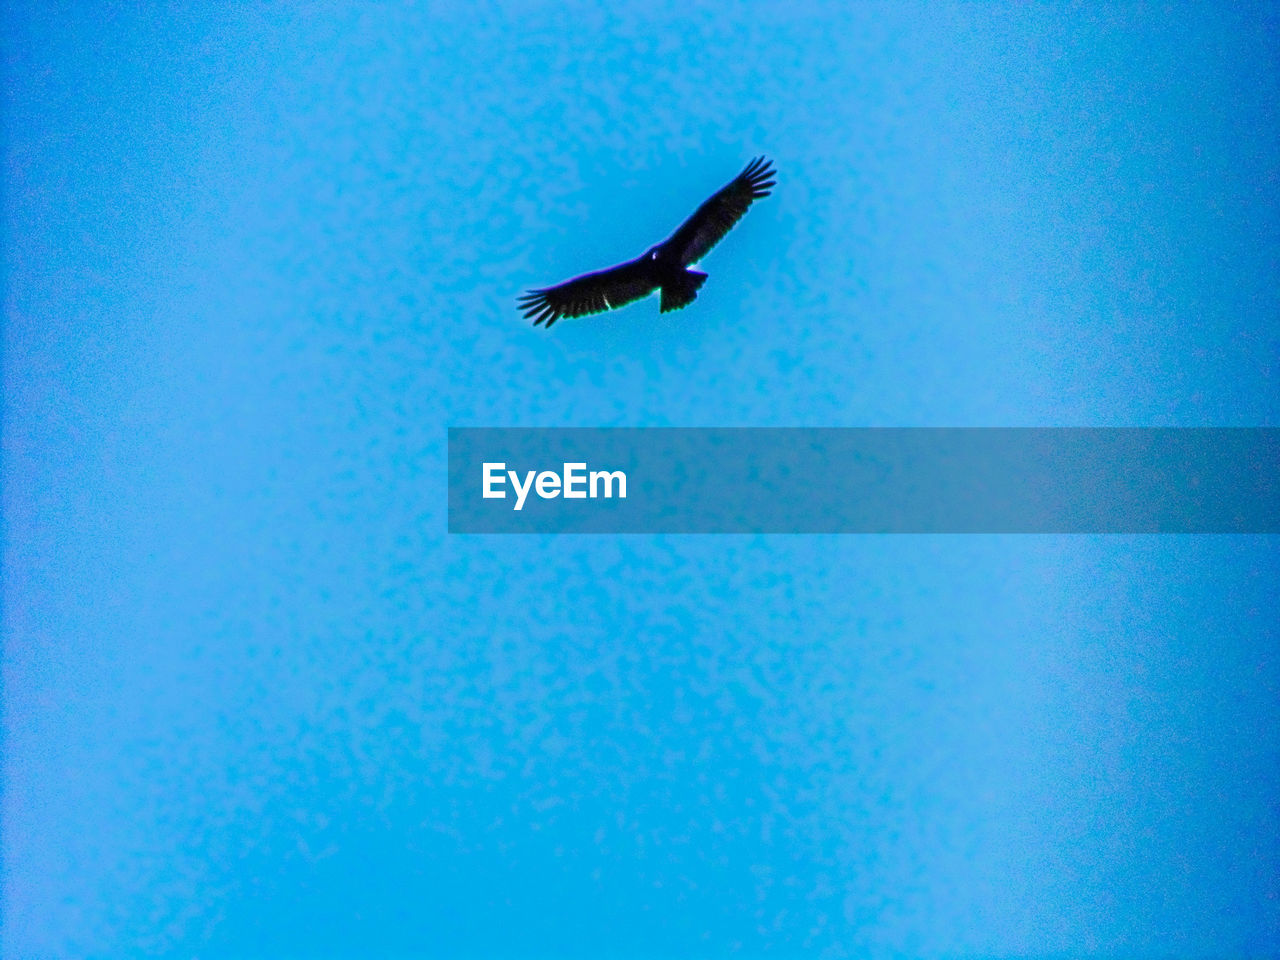 LOW ANGLE VIEW OF EAGLE FLYING IN CLEAR BLUE SKY